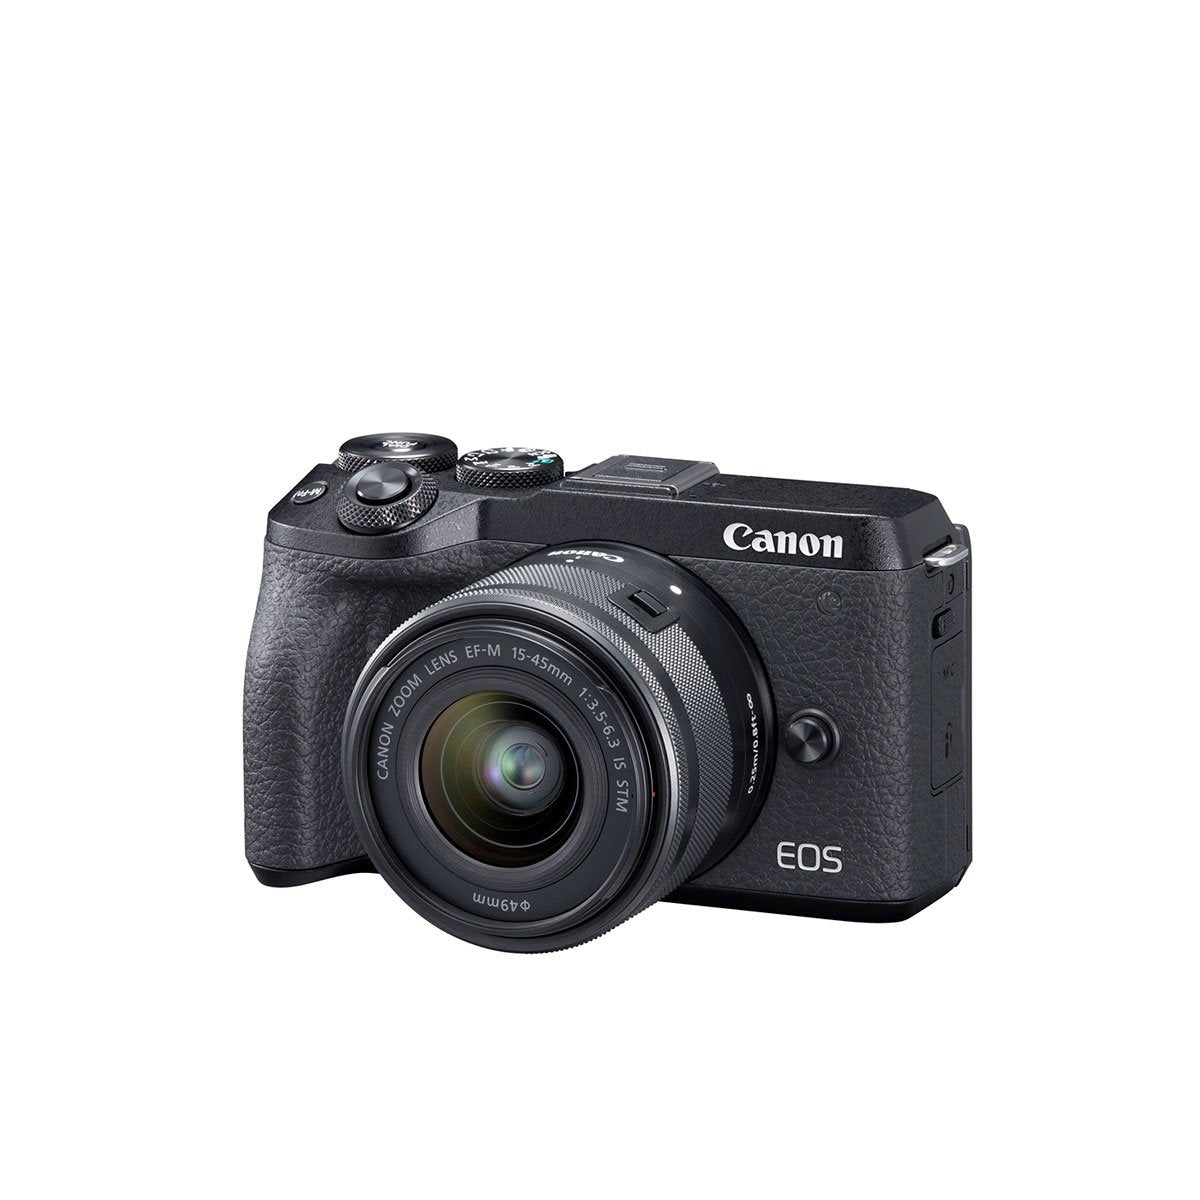 Canon EOS M6 Mark II Mirrorless Camera with EF-M 15-45mm IS STM Lens Specialty Kit (Black)